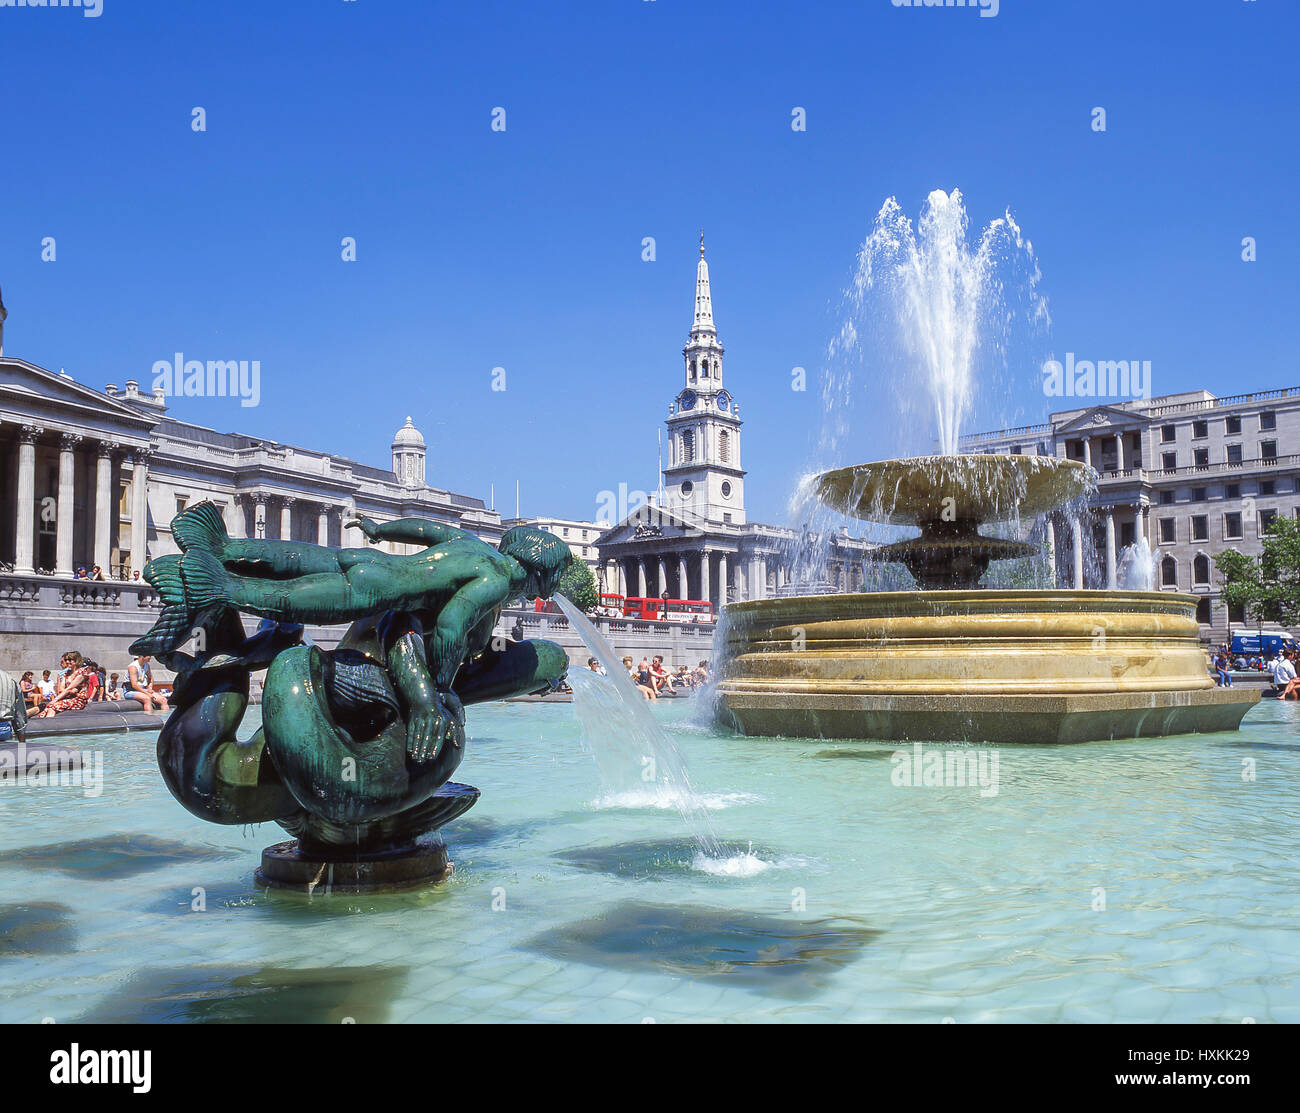 La fontaine, Trafalgar Square, City of westminster, Greater London, Angleterre, Royaume-Uni Banque D'Images